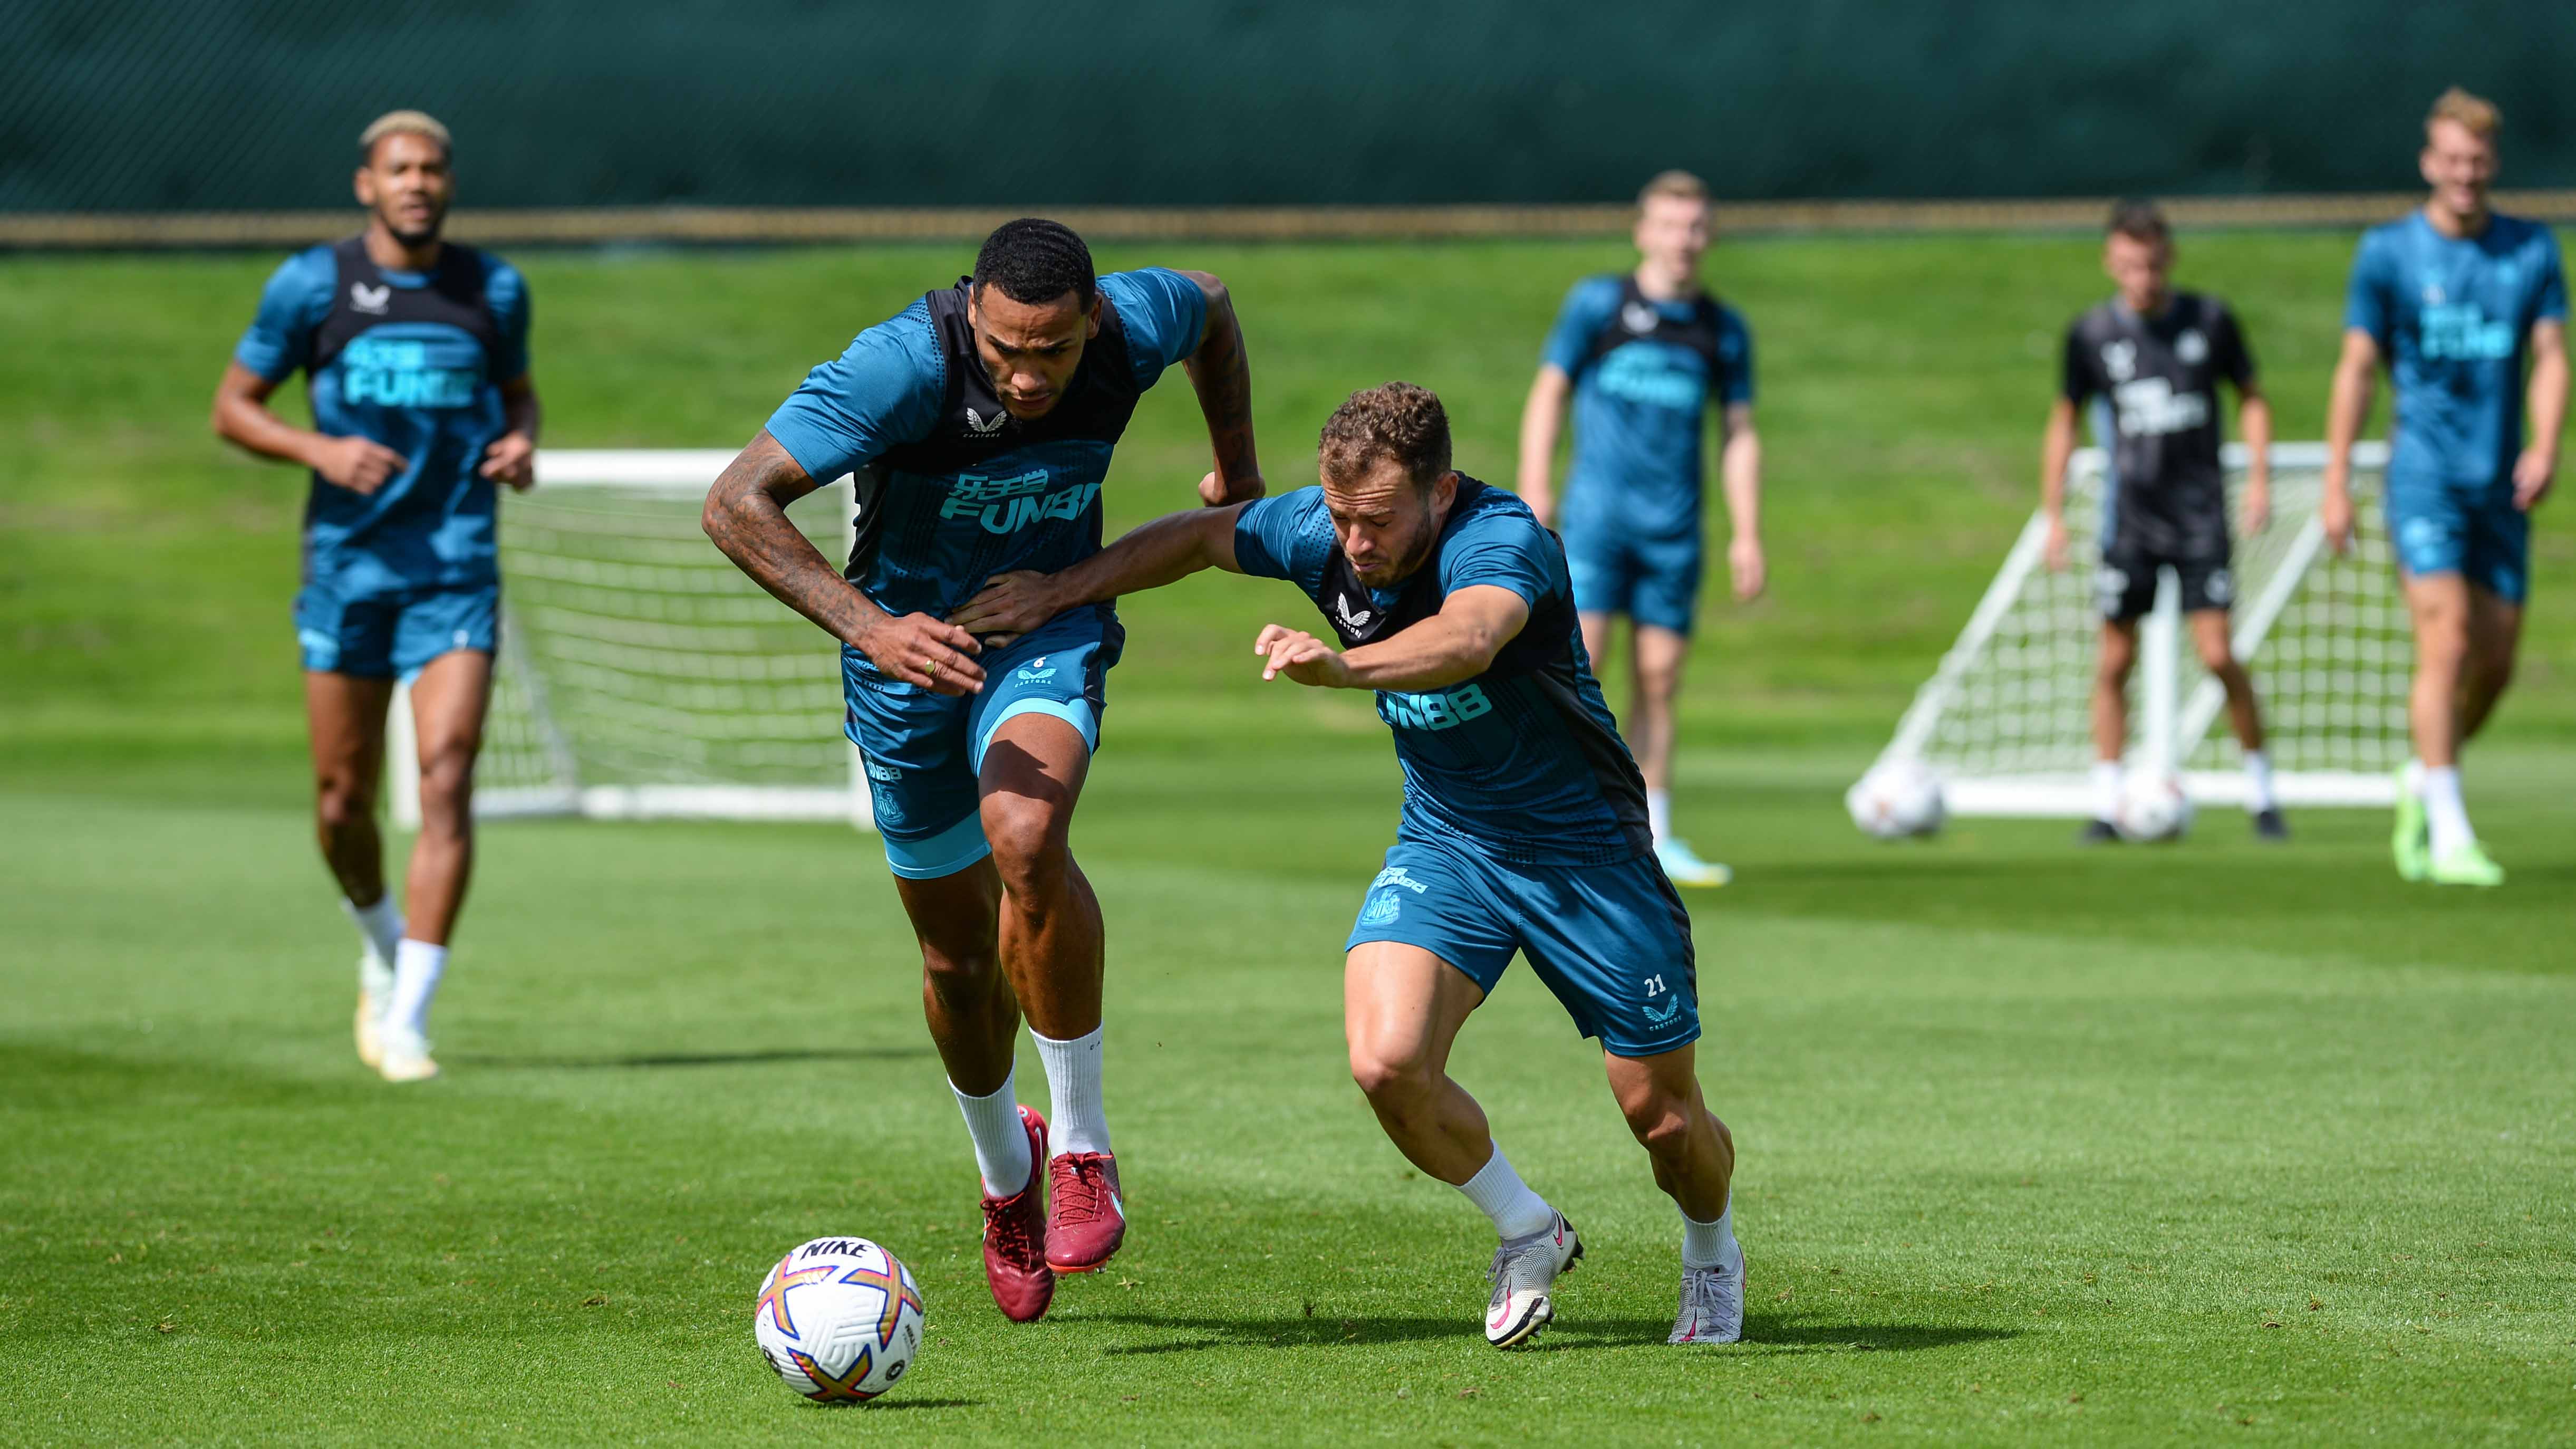 Toon in training: Fired up for Forest